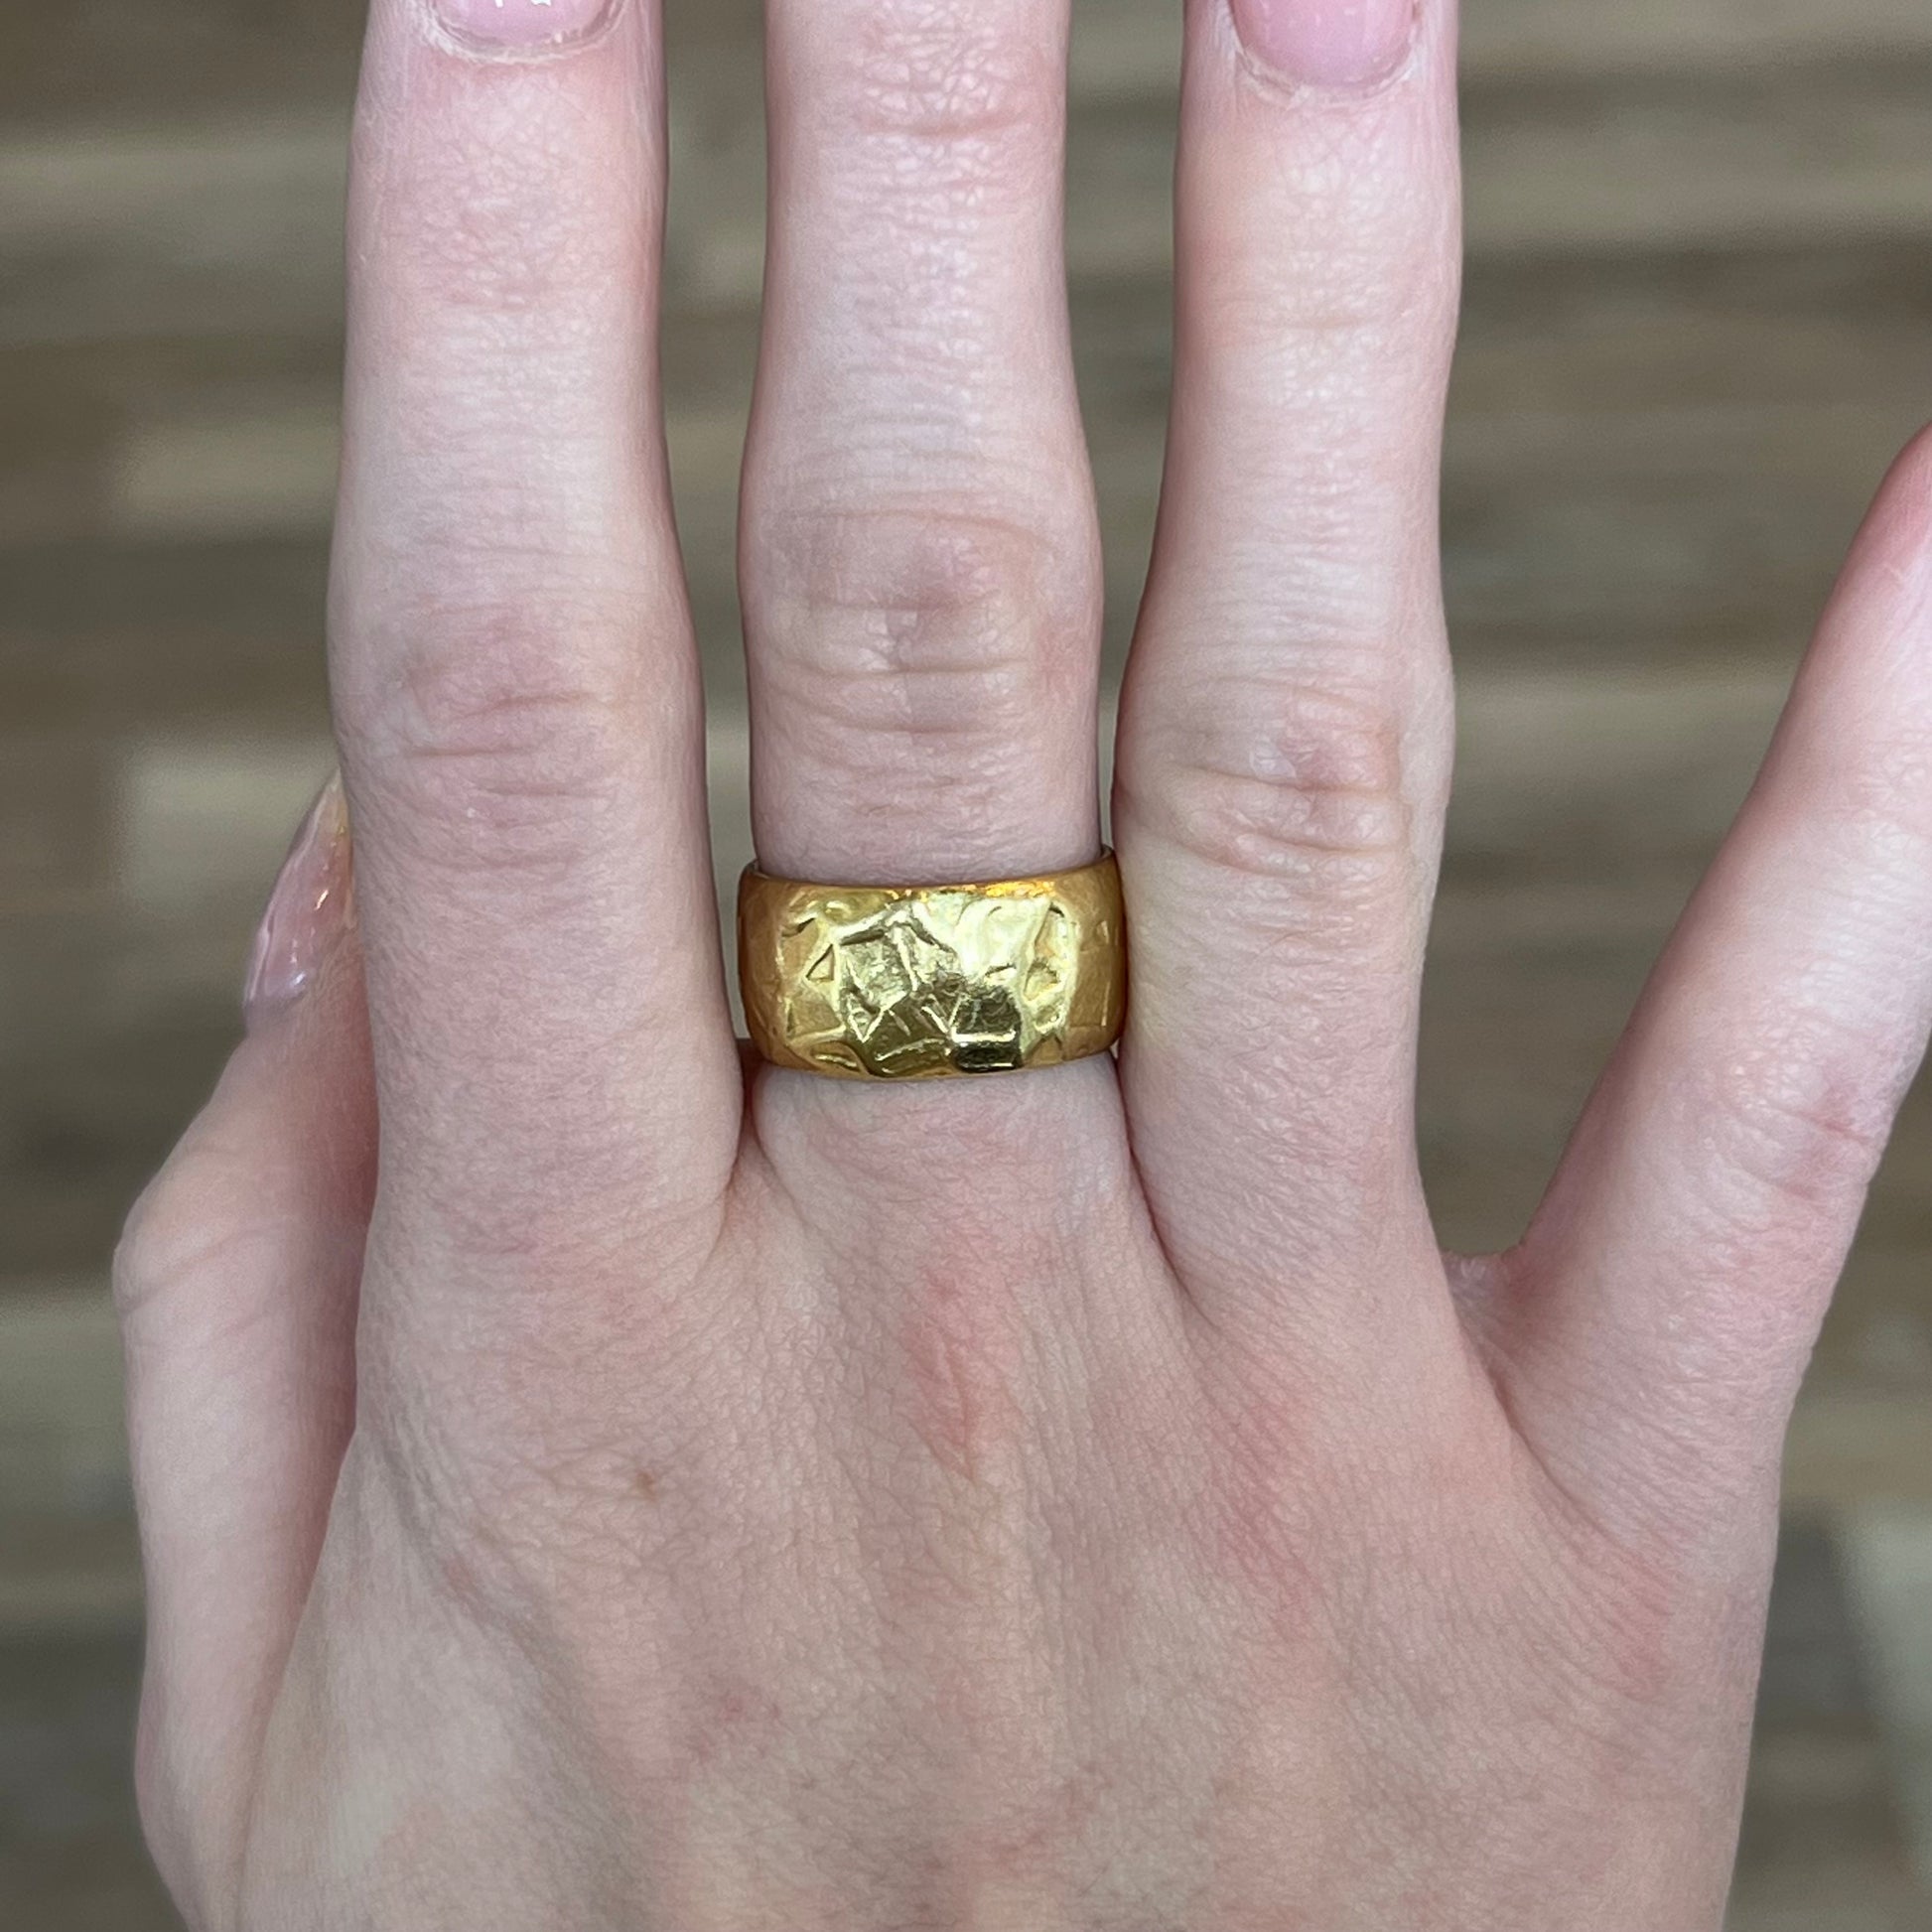 10mm Textured Band in 18k Yellow Gold